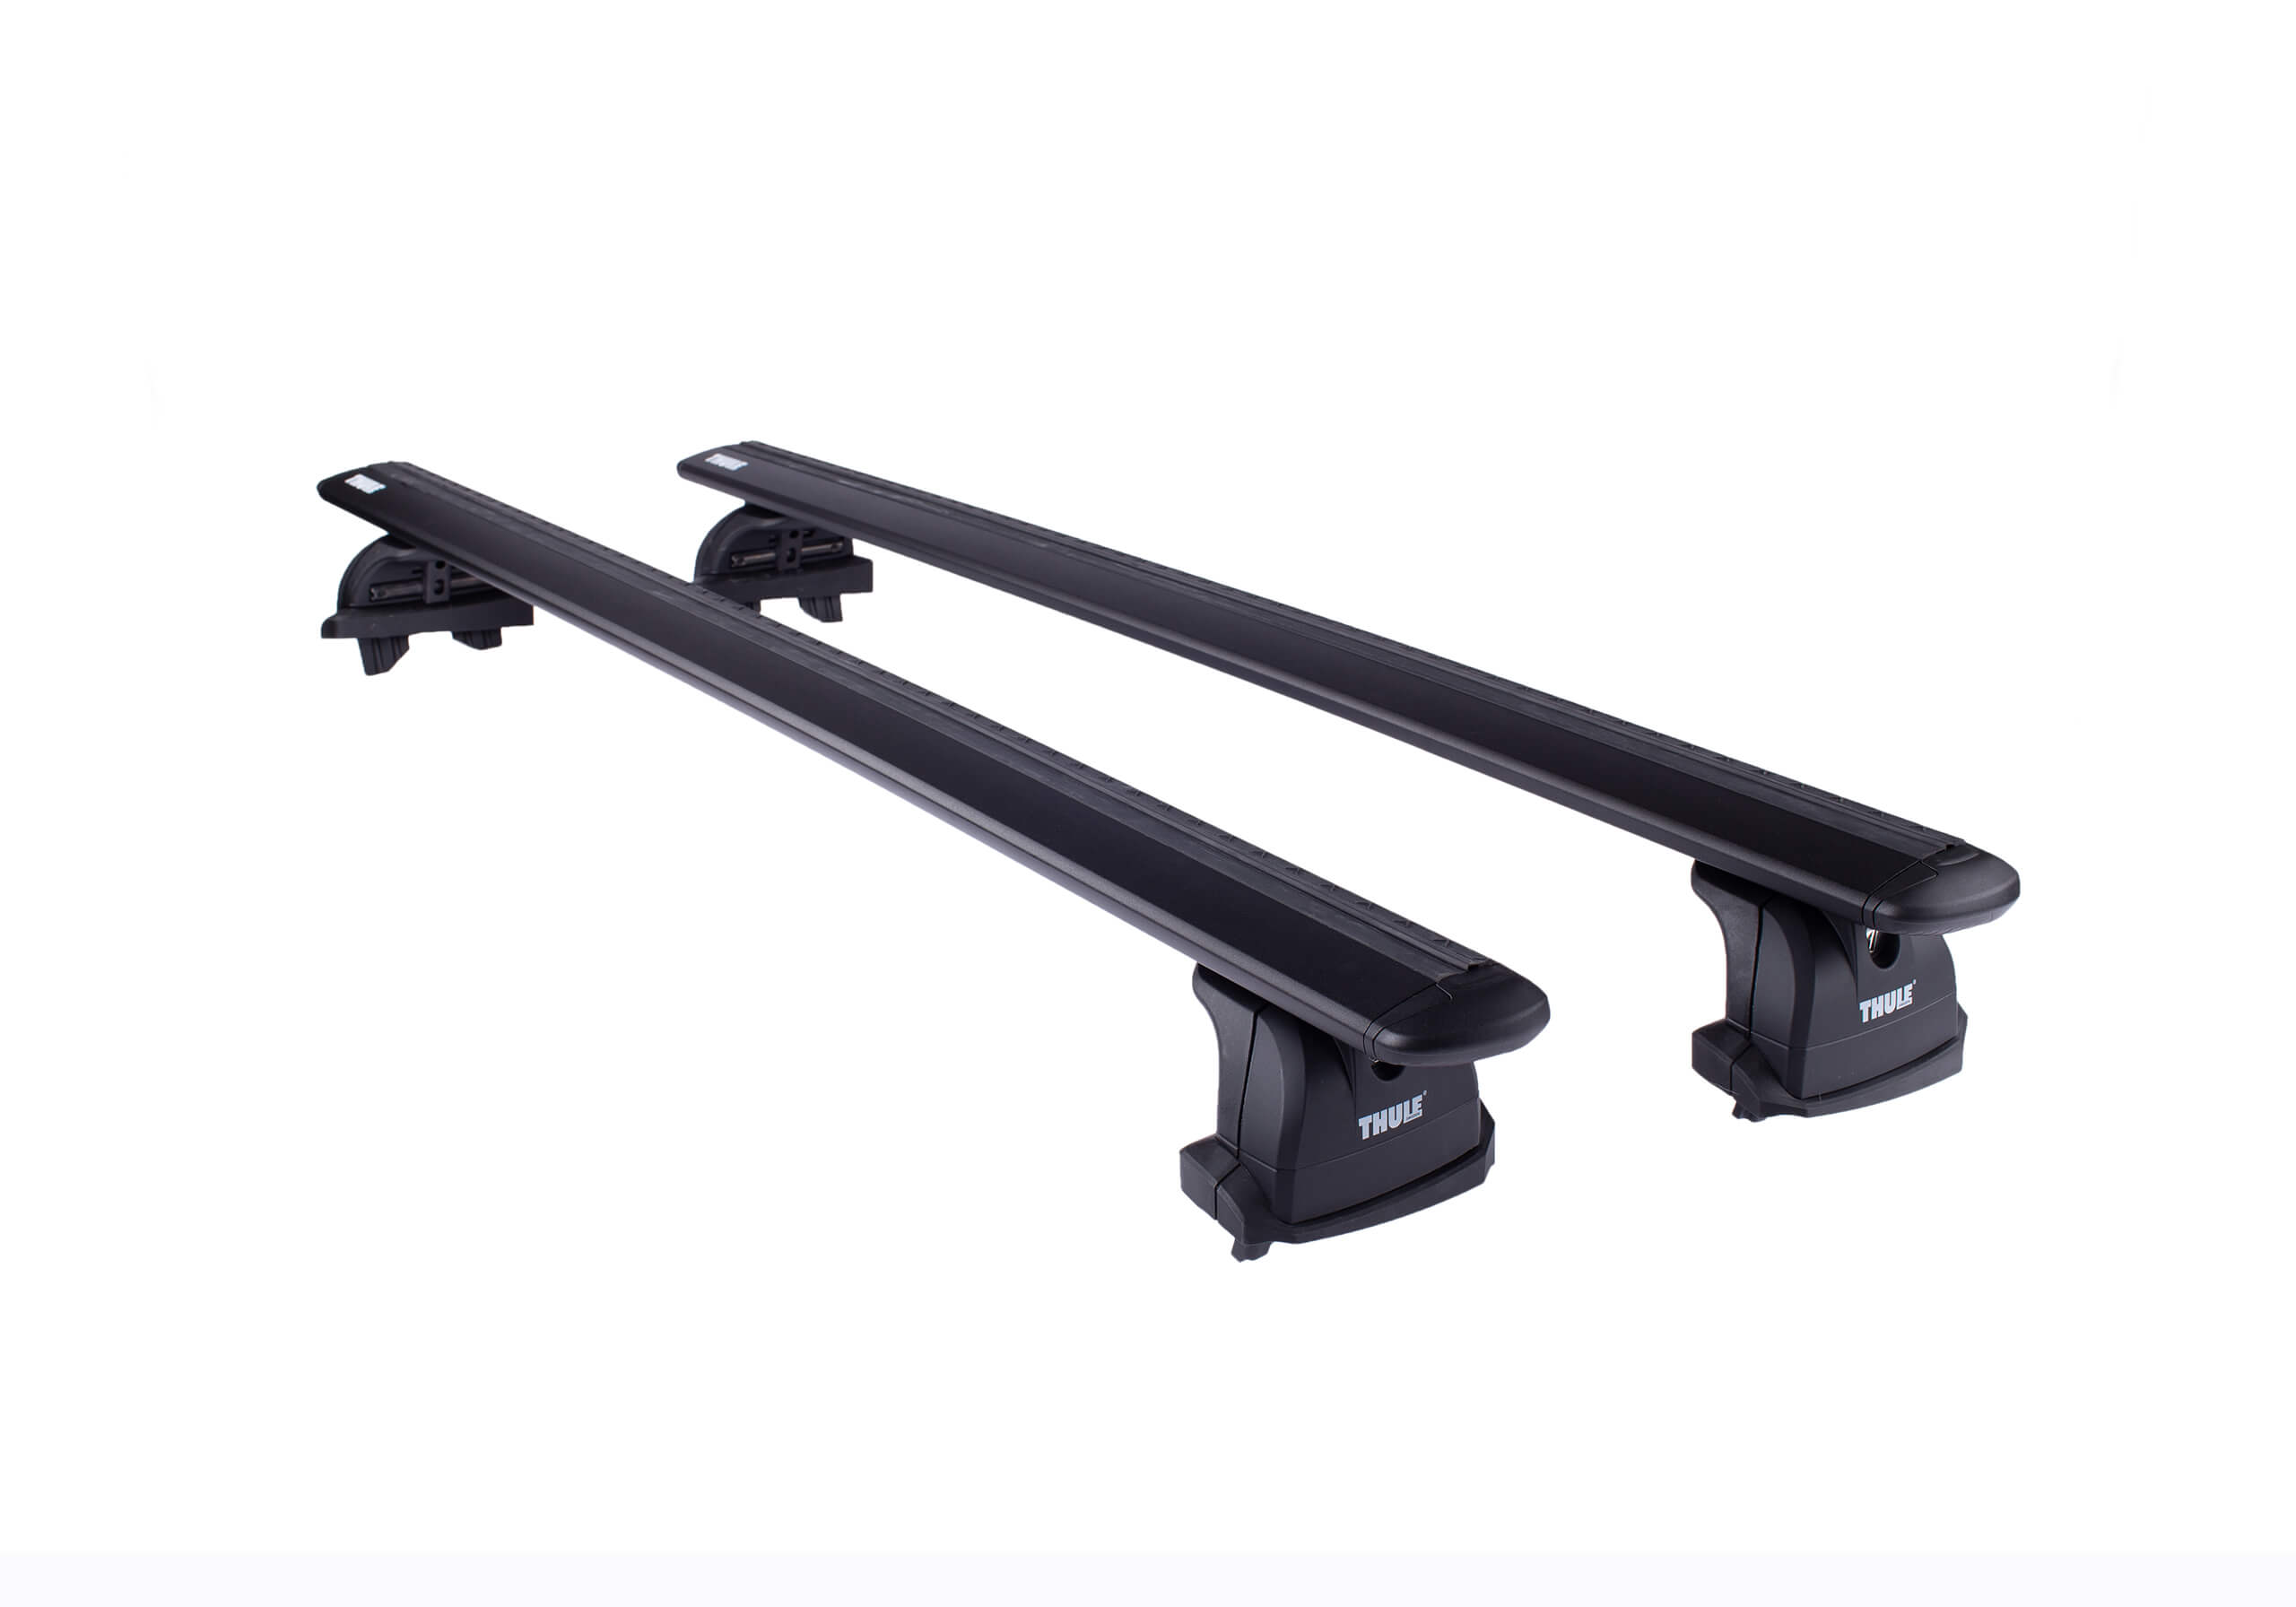 BMW 2 series coupe (2014 to 2022):Thule black WingBars package - 753, 7112B, 3028